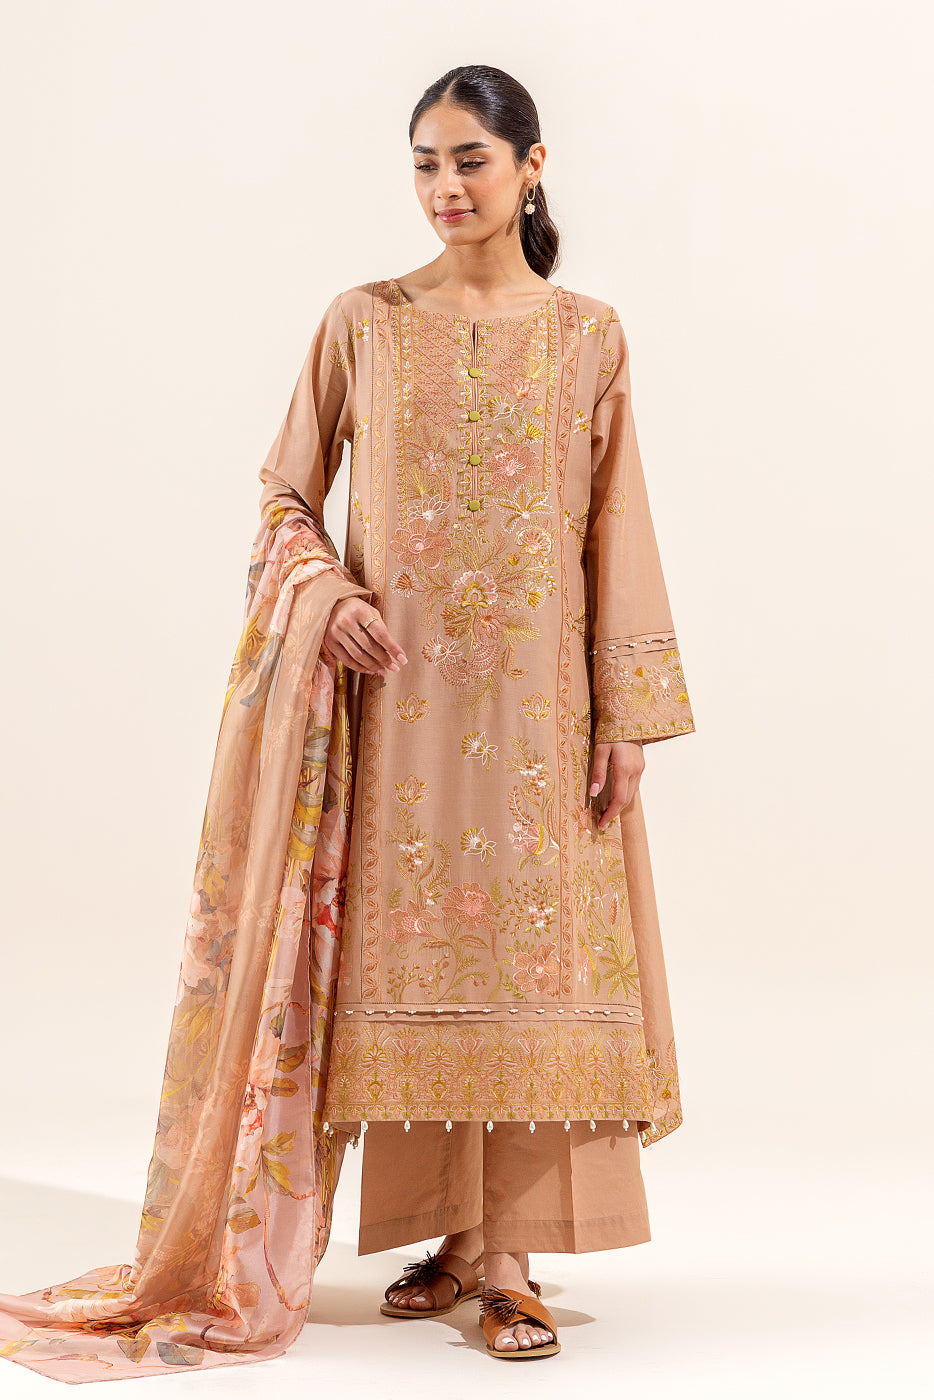 3 PIECE EMBROIDERED LAWN SUIT (UNSTITCHED)